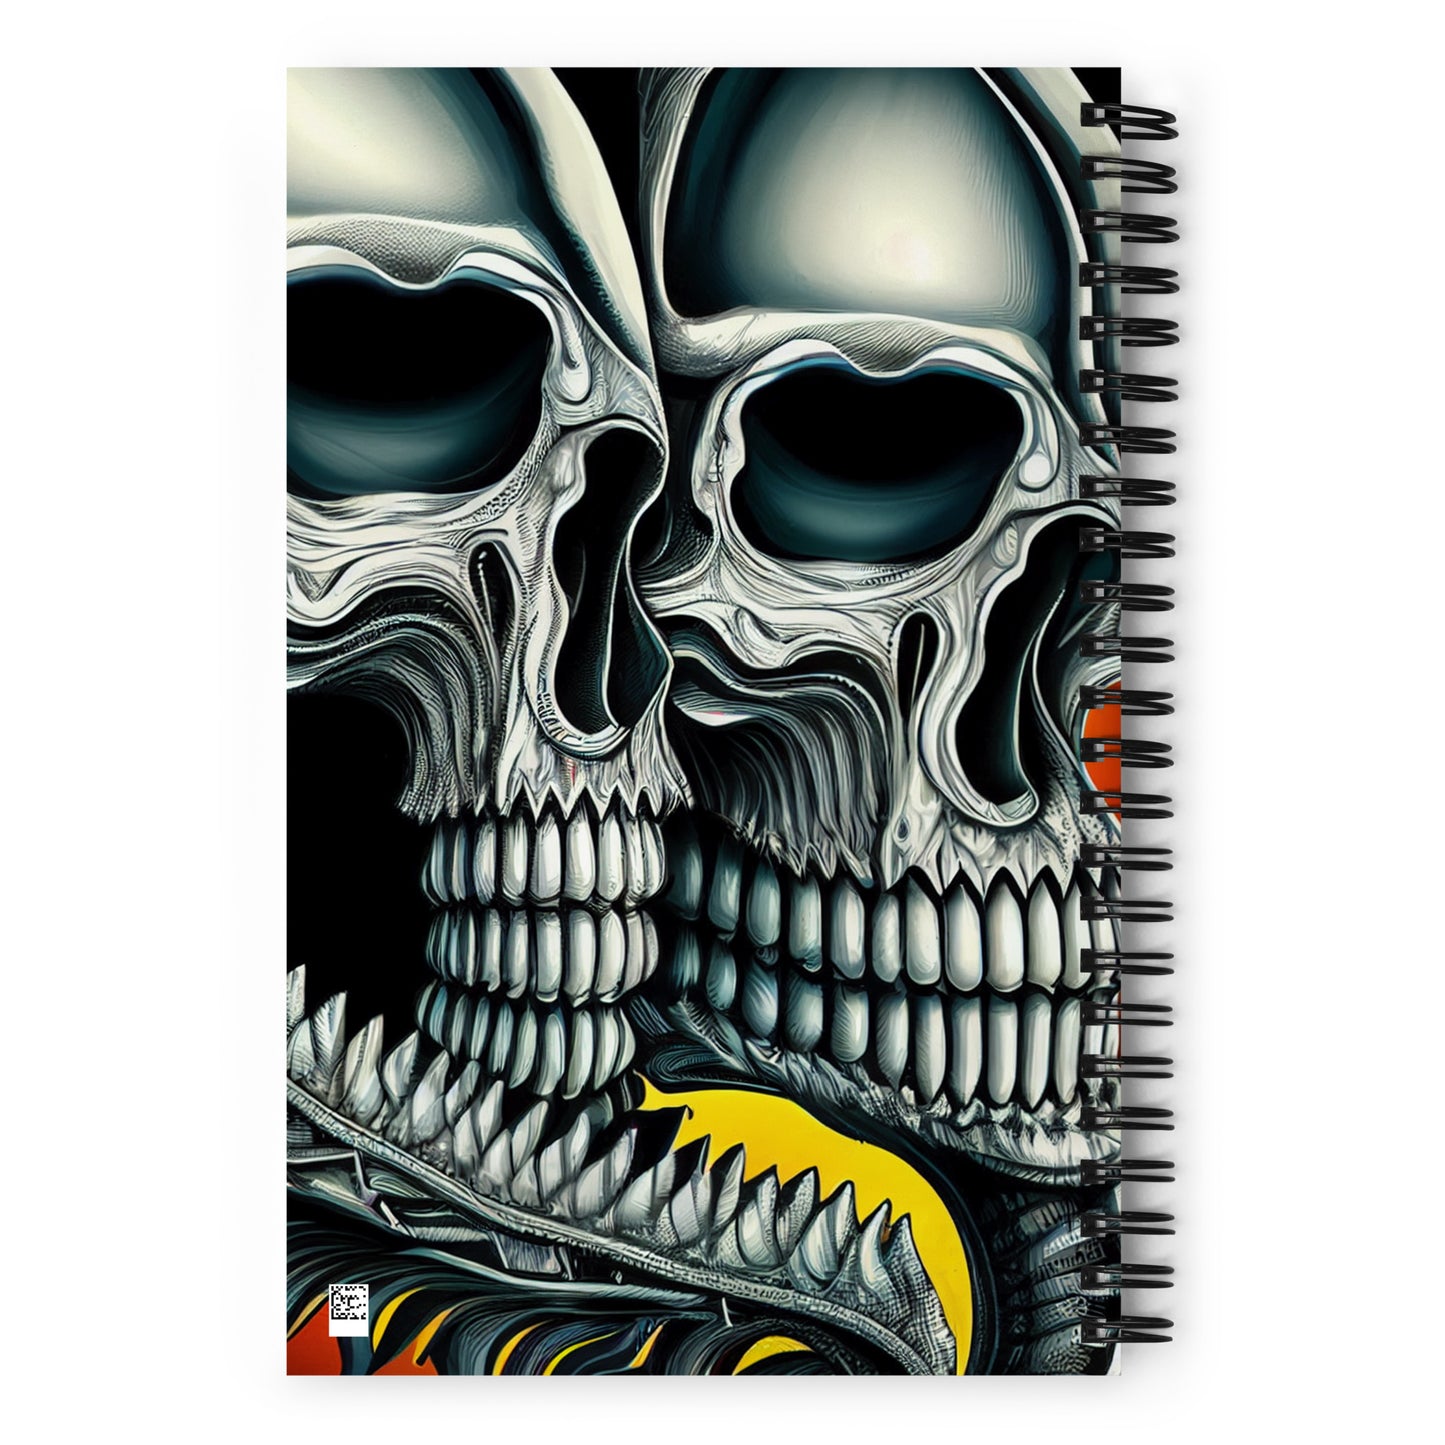 Double Skull Spiral notebook